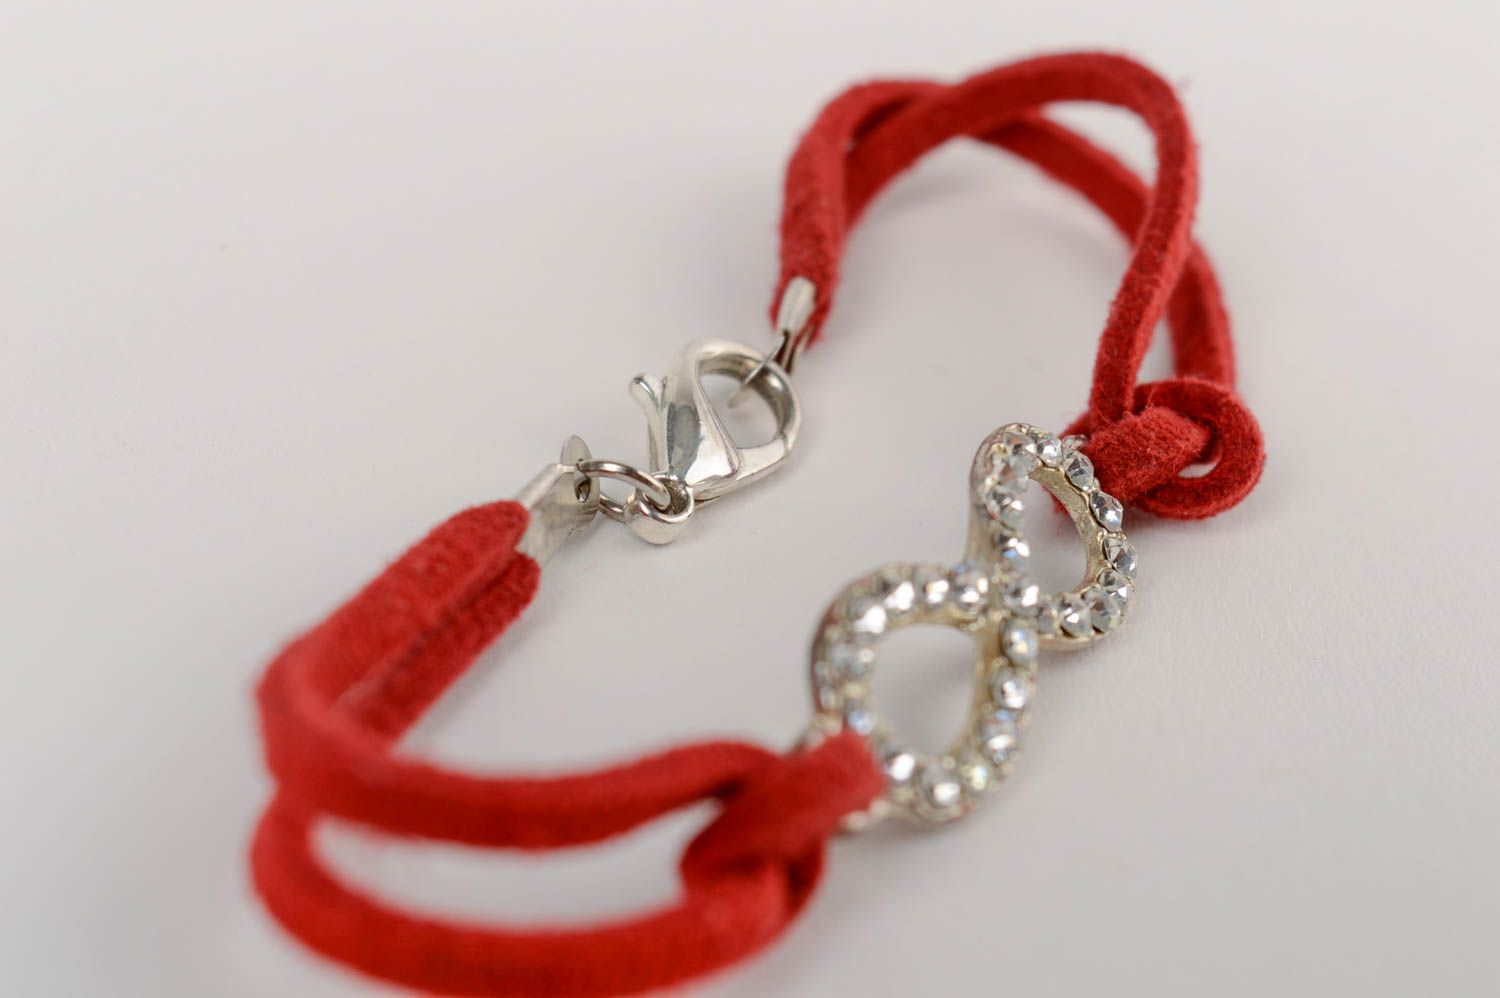 Handmade thin red suede cord bracelet with metal charm infinity sign photo 4